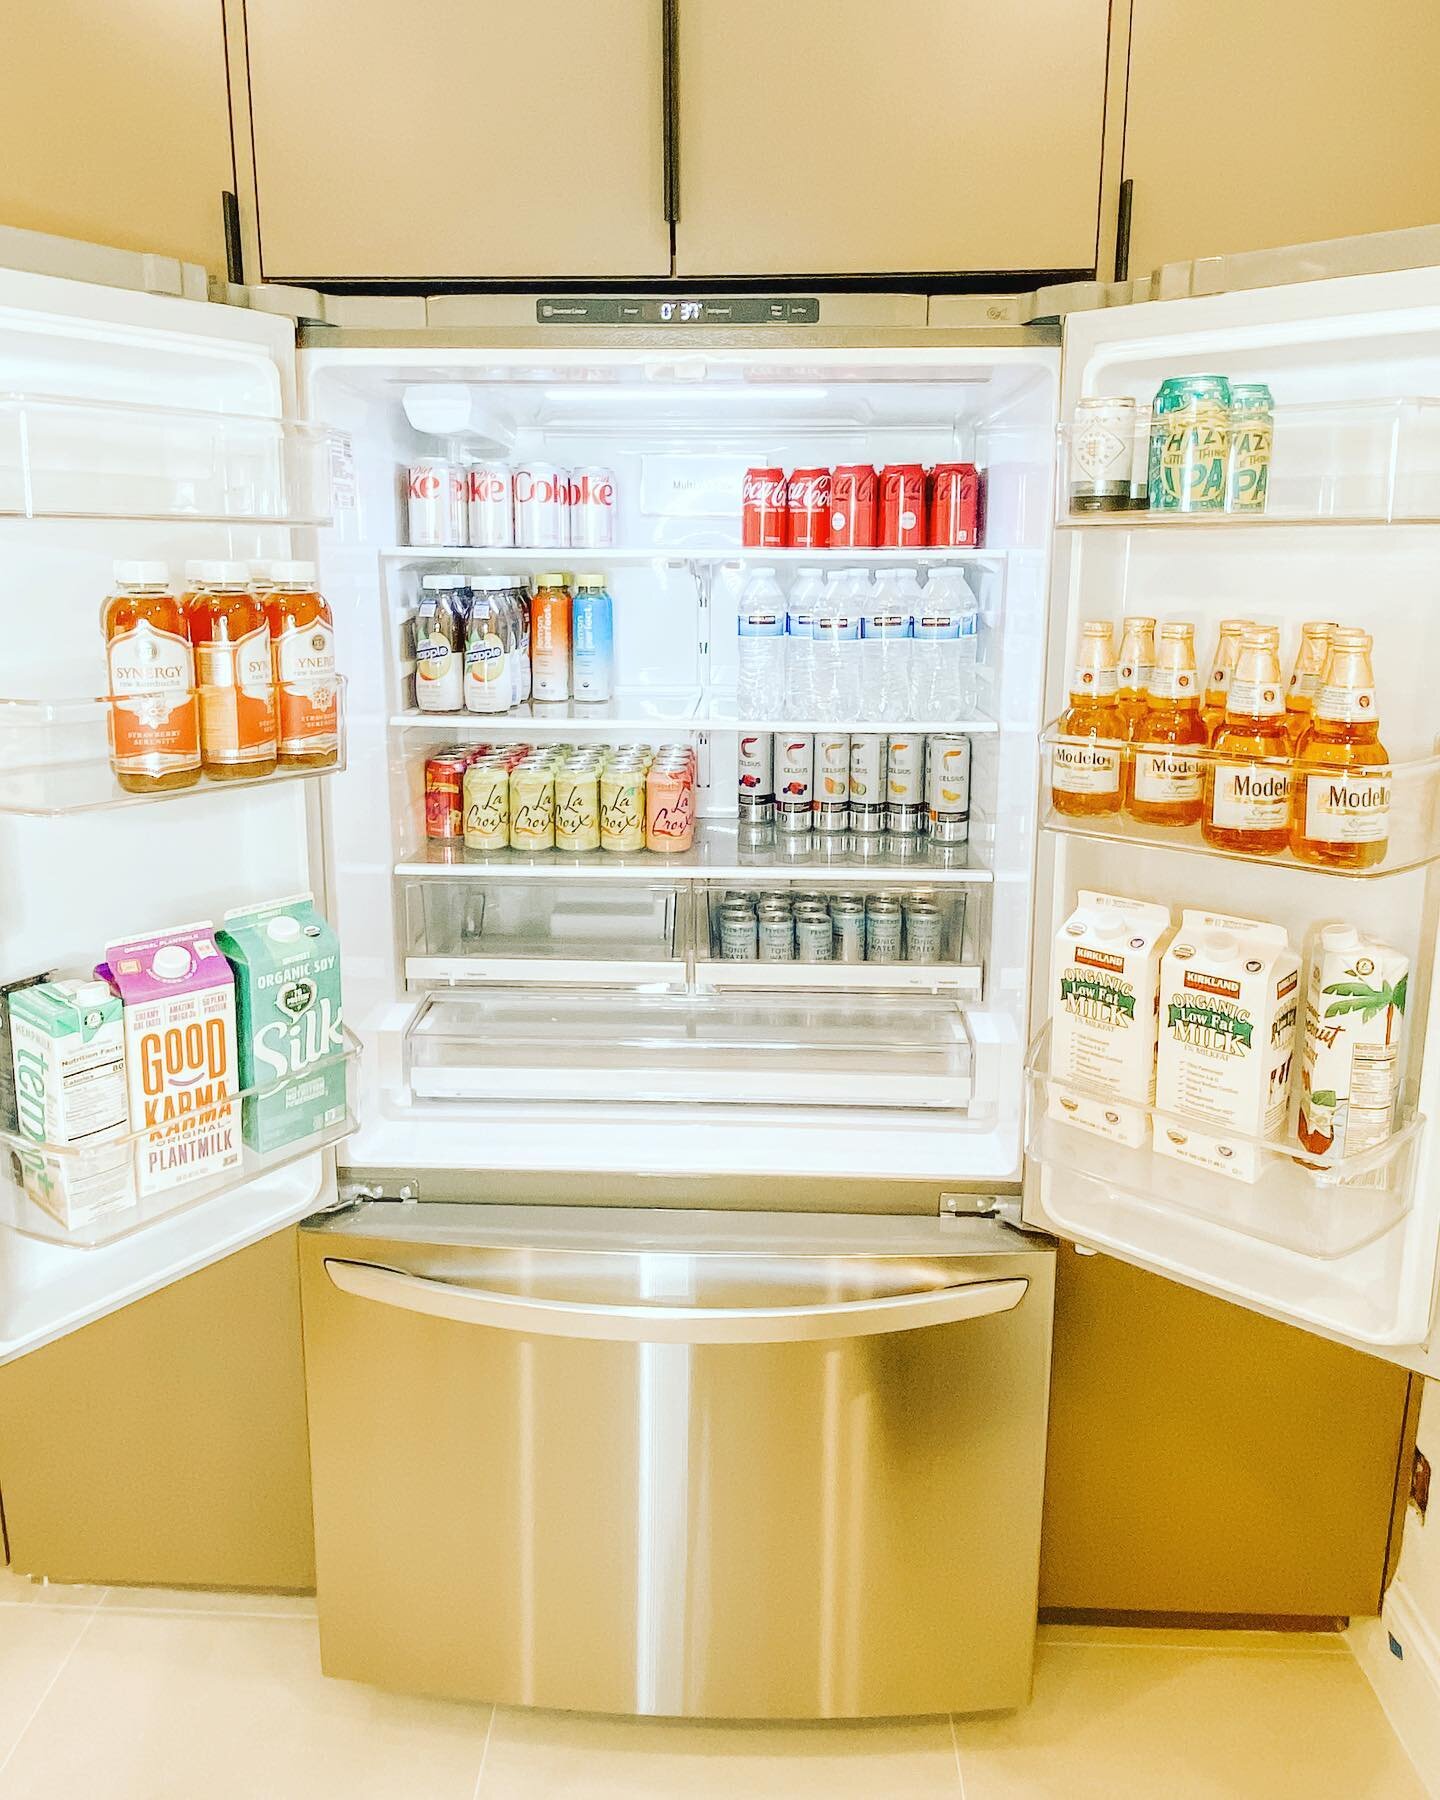 Now tell me this doesn&rsquo;t make you want a designated drink fridge in your house!?!

#fridgeorganization
#fridgegoals 
#kitchenorganization 
#kitchenorganizationideas 
#refrigeratororganization